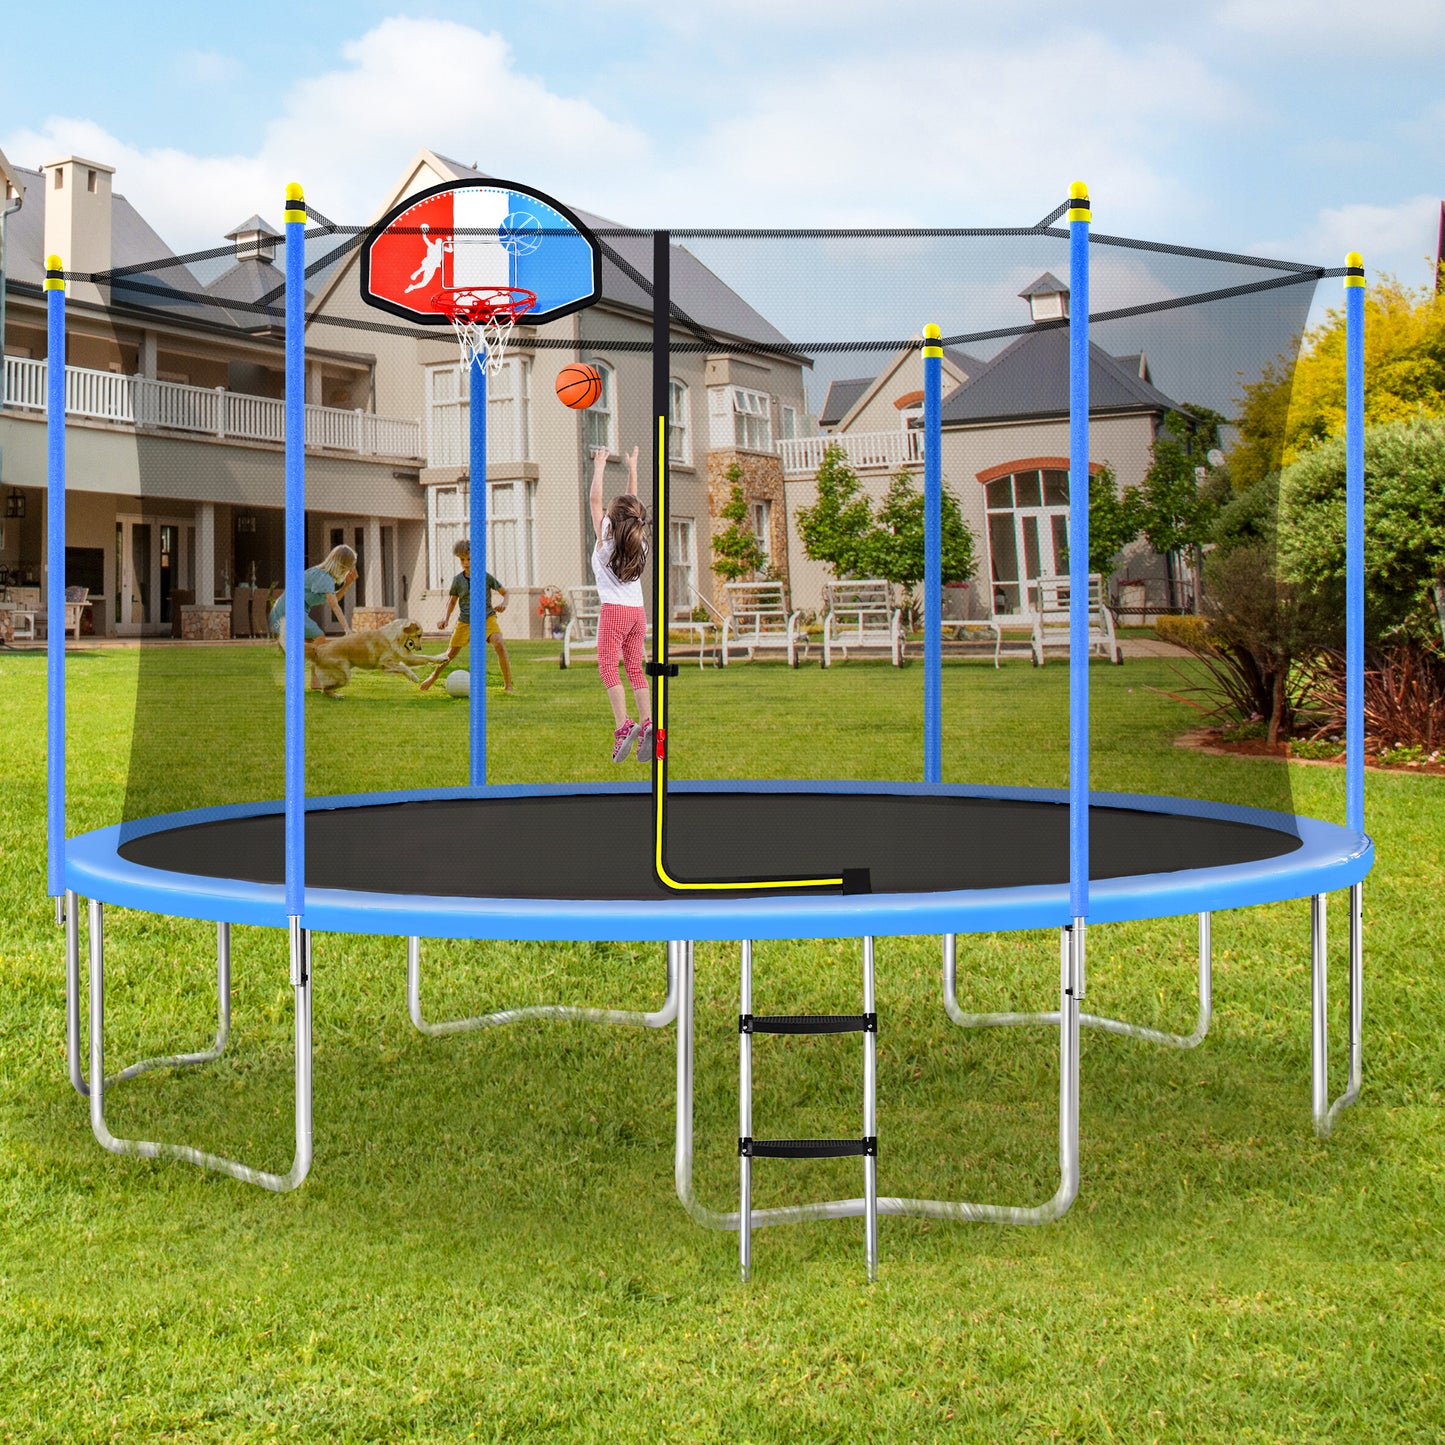 15FT Trampoline for Kids with Safety Enclosure Net, Basketball Hoop and Ladder, Easy Assembly Round Outdoor Recreational Trampoline